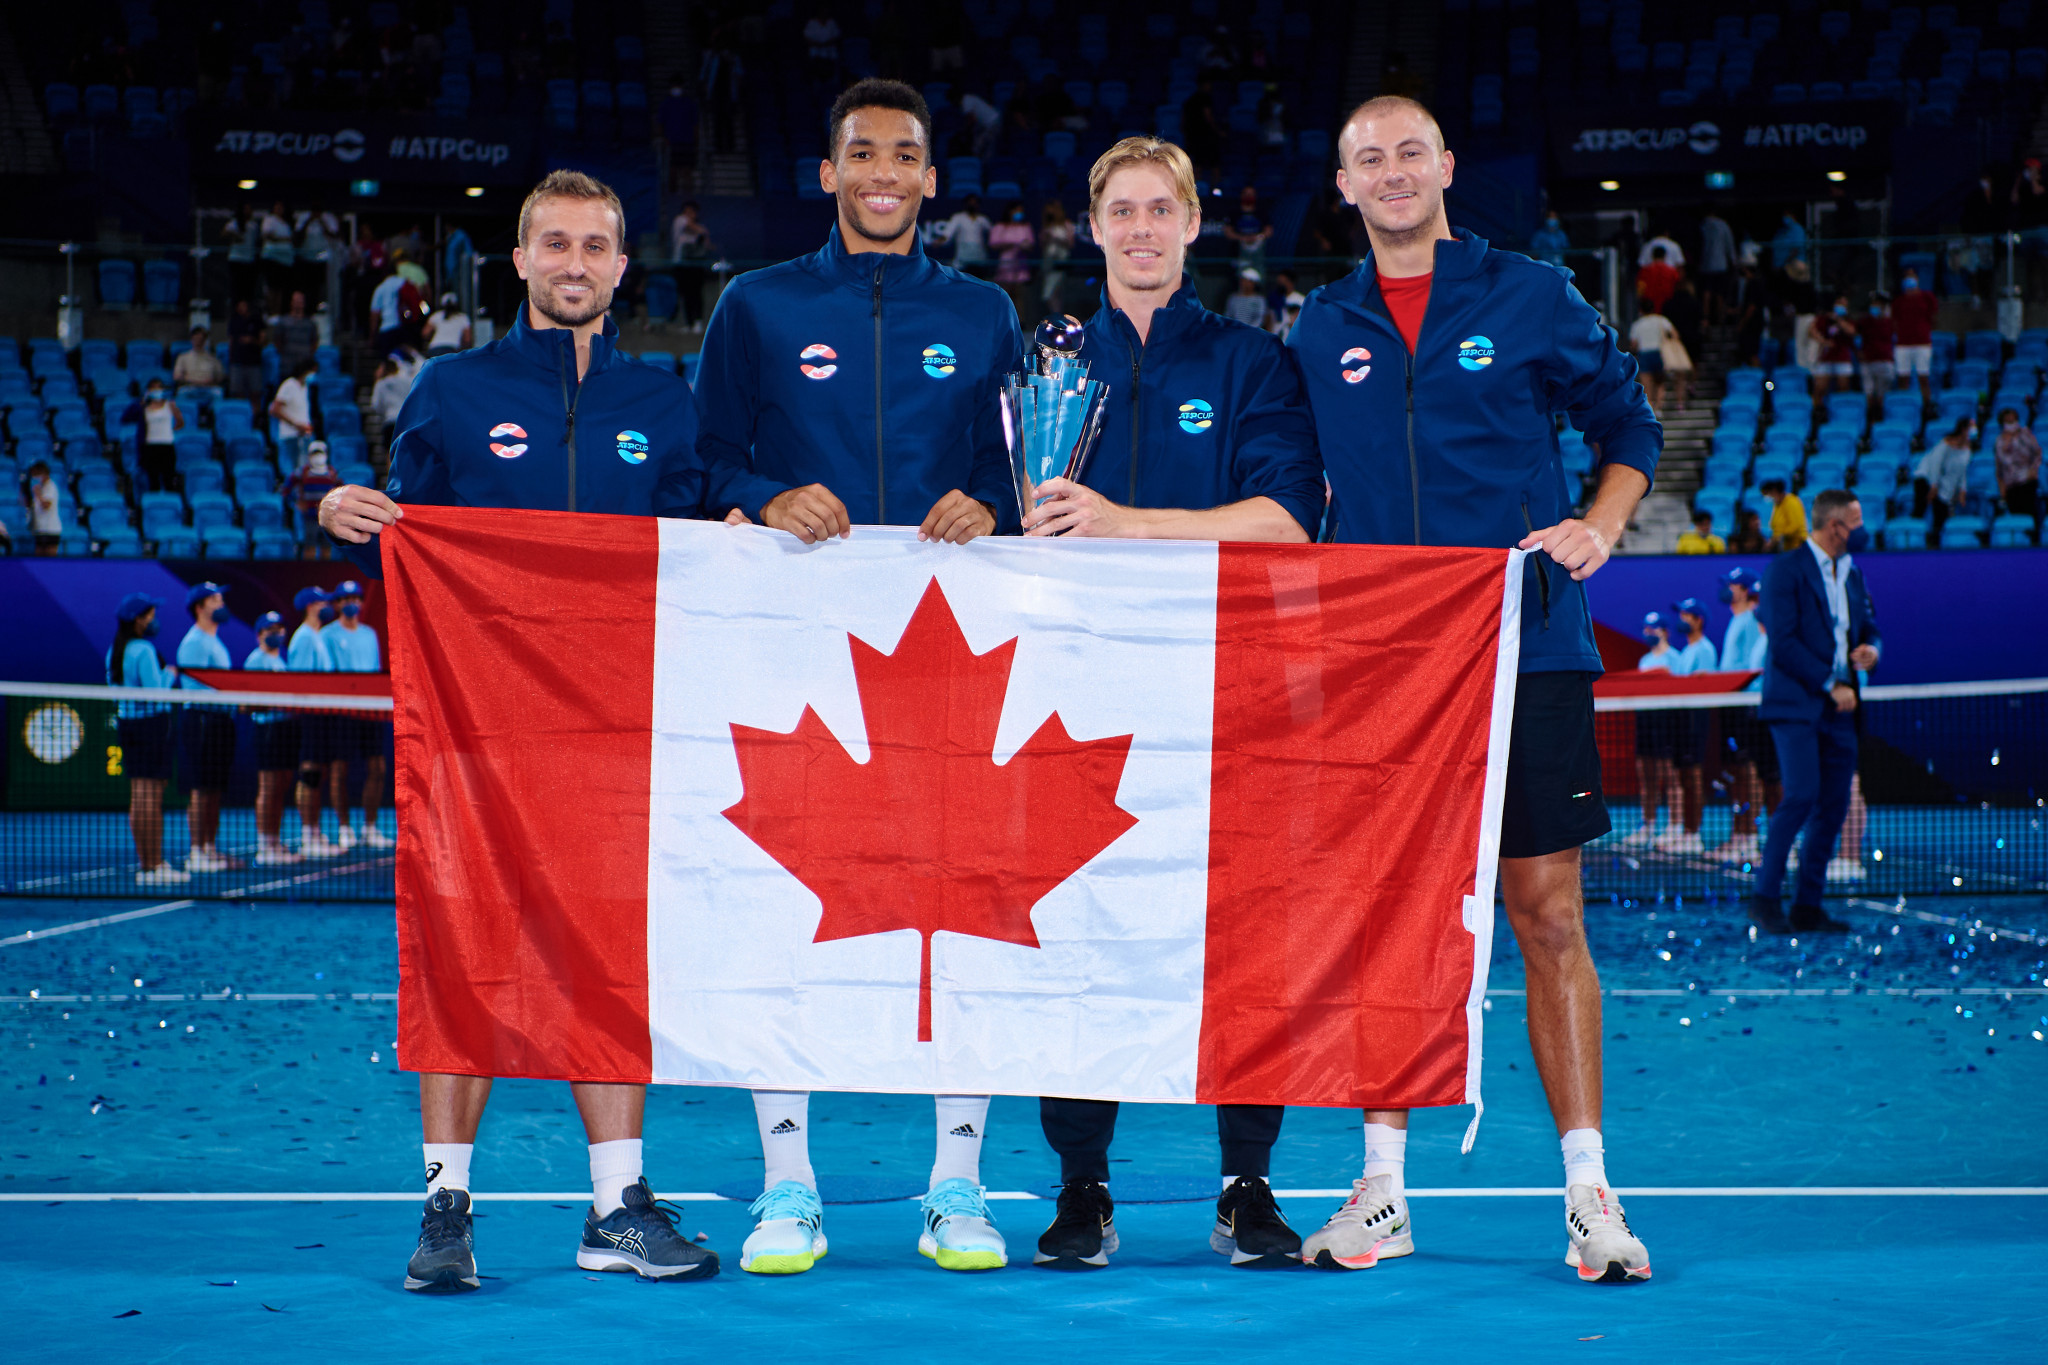 Félix Auger-Aliassime, second left, beat Spain's Roberto Bautista Agut in straight sets to clinch the ATP Cup for Canada ©Getty Images